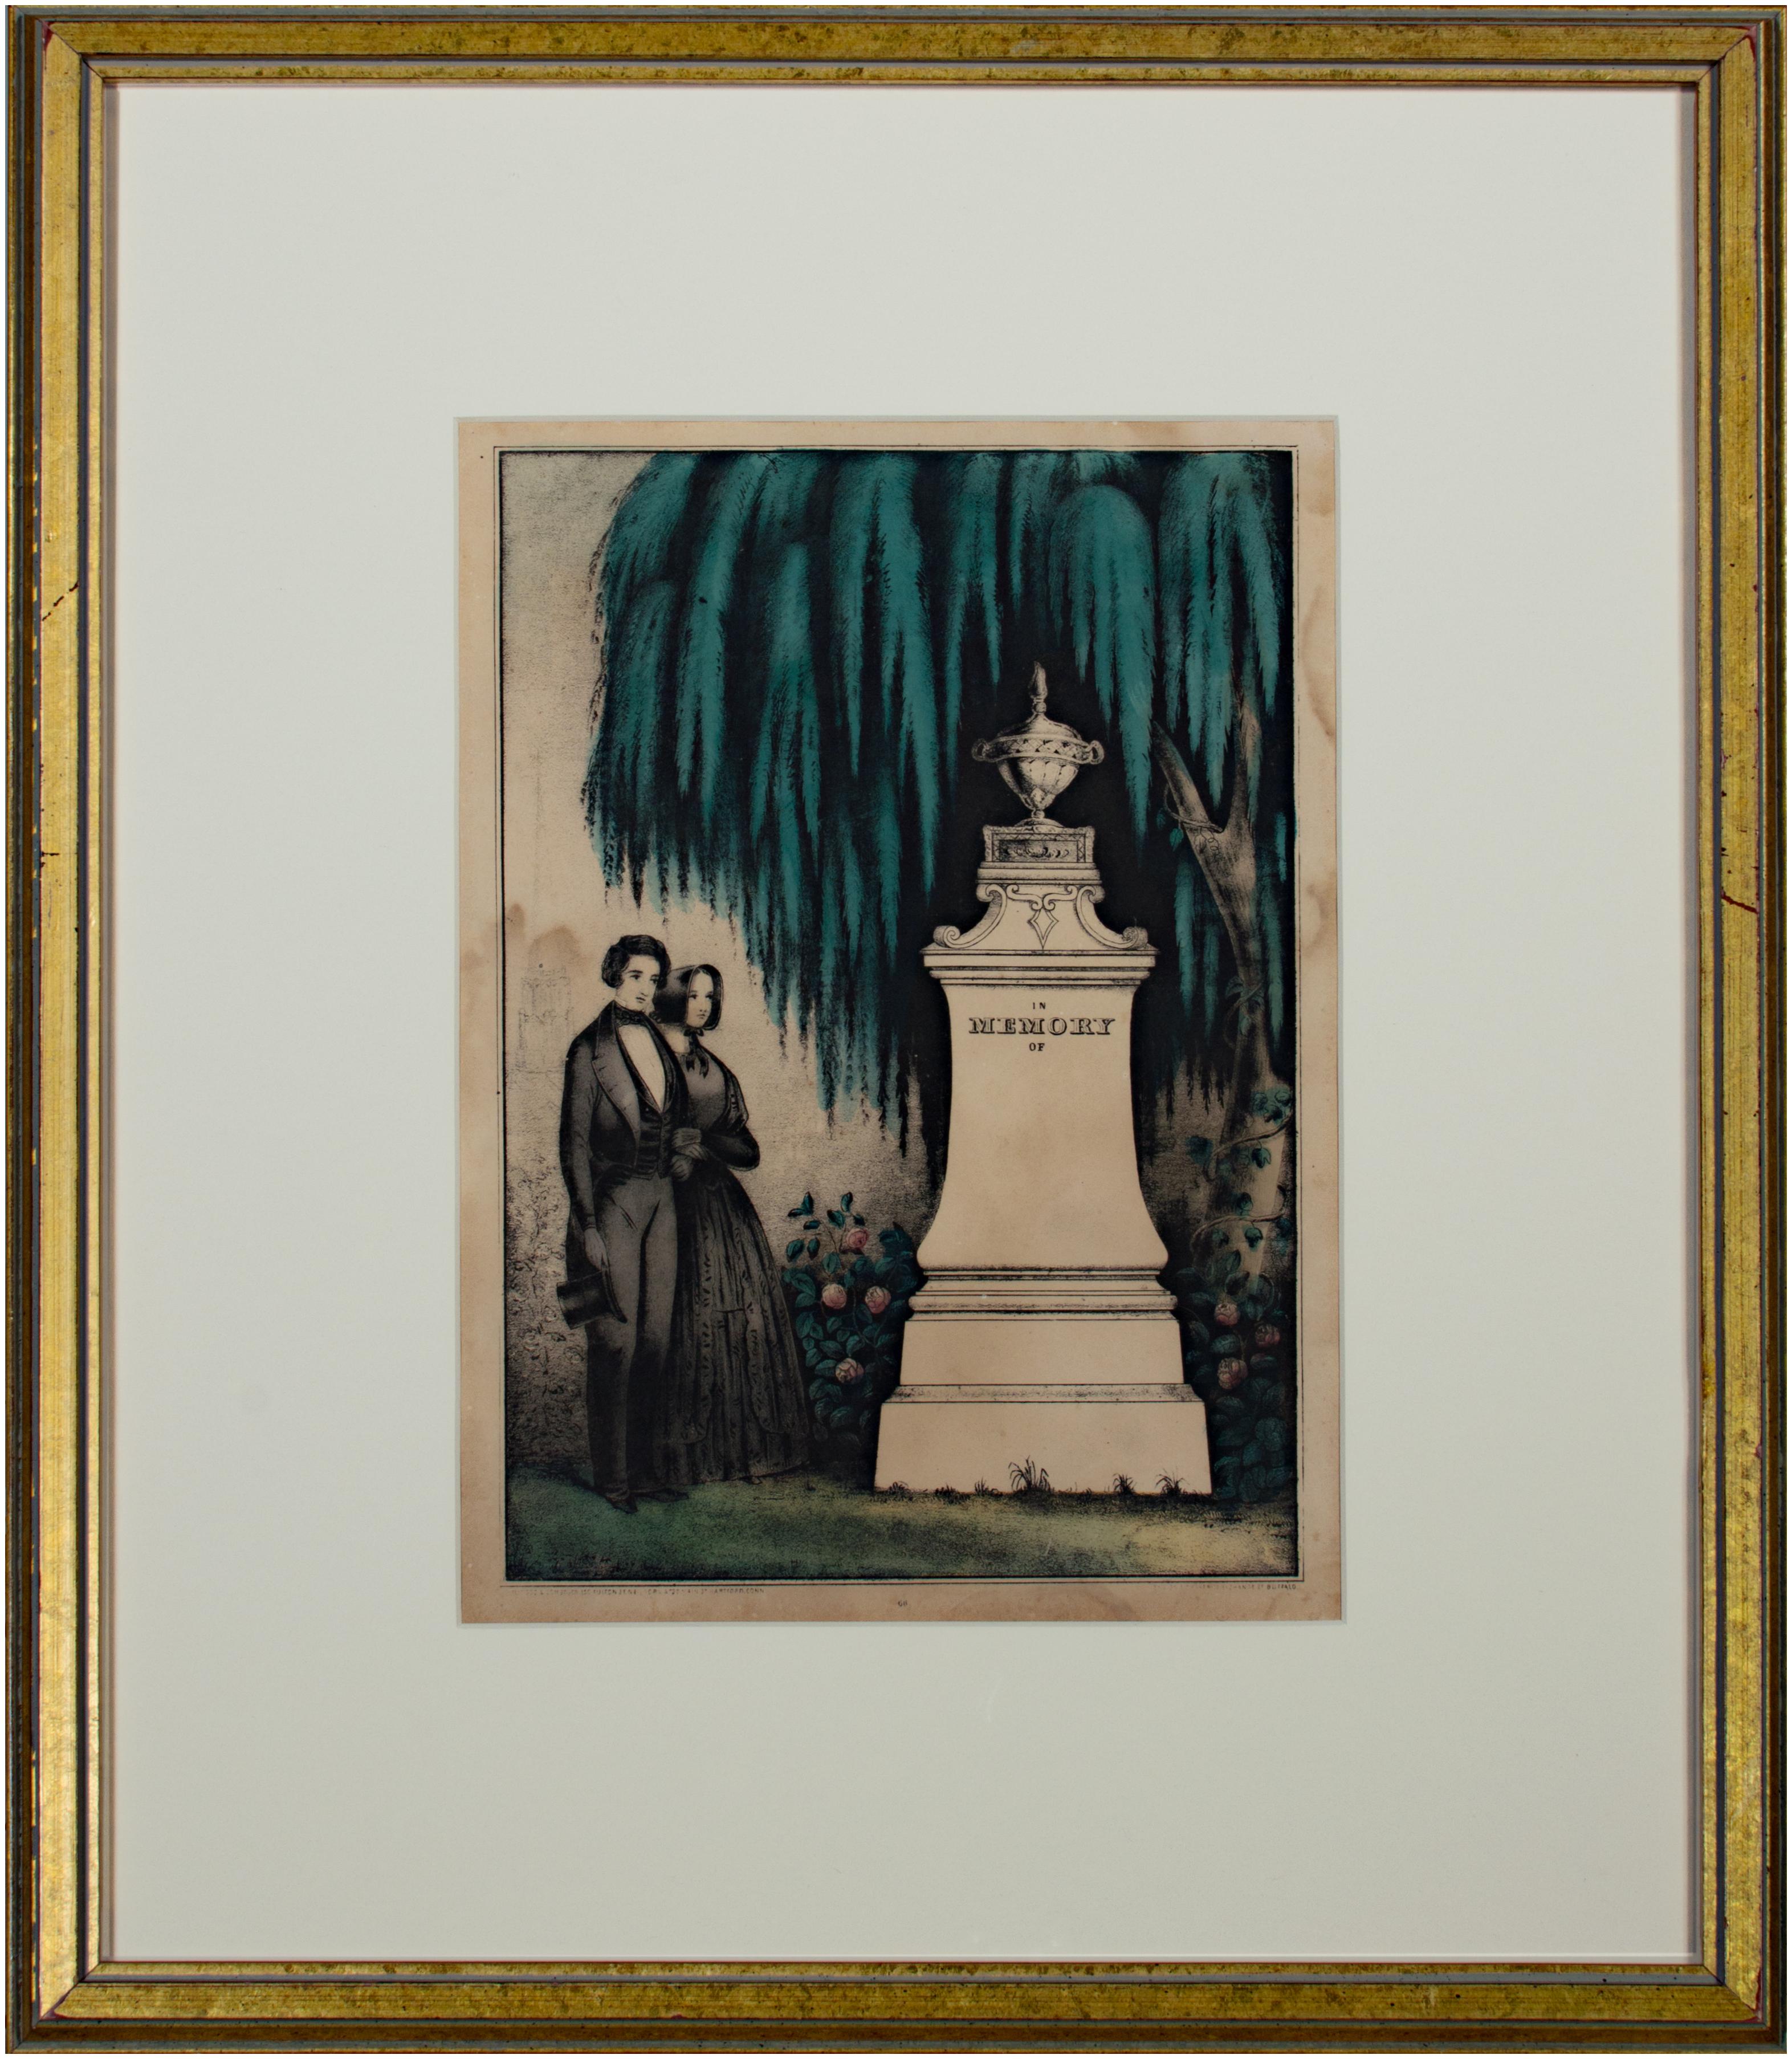 'In Memory of (66)' original Kellogg & Comstock hand-colored mourning lithograph